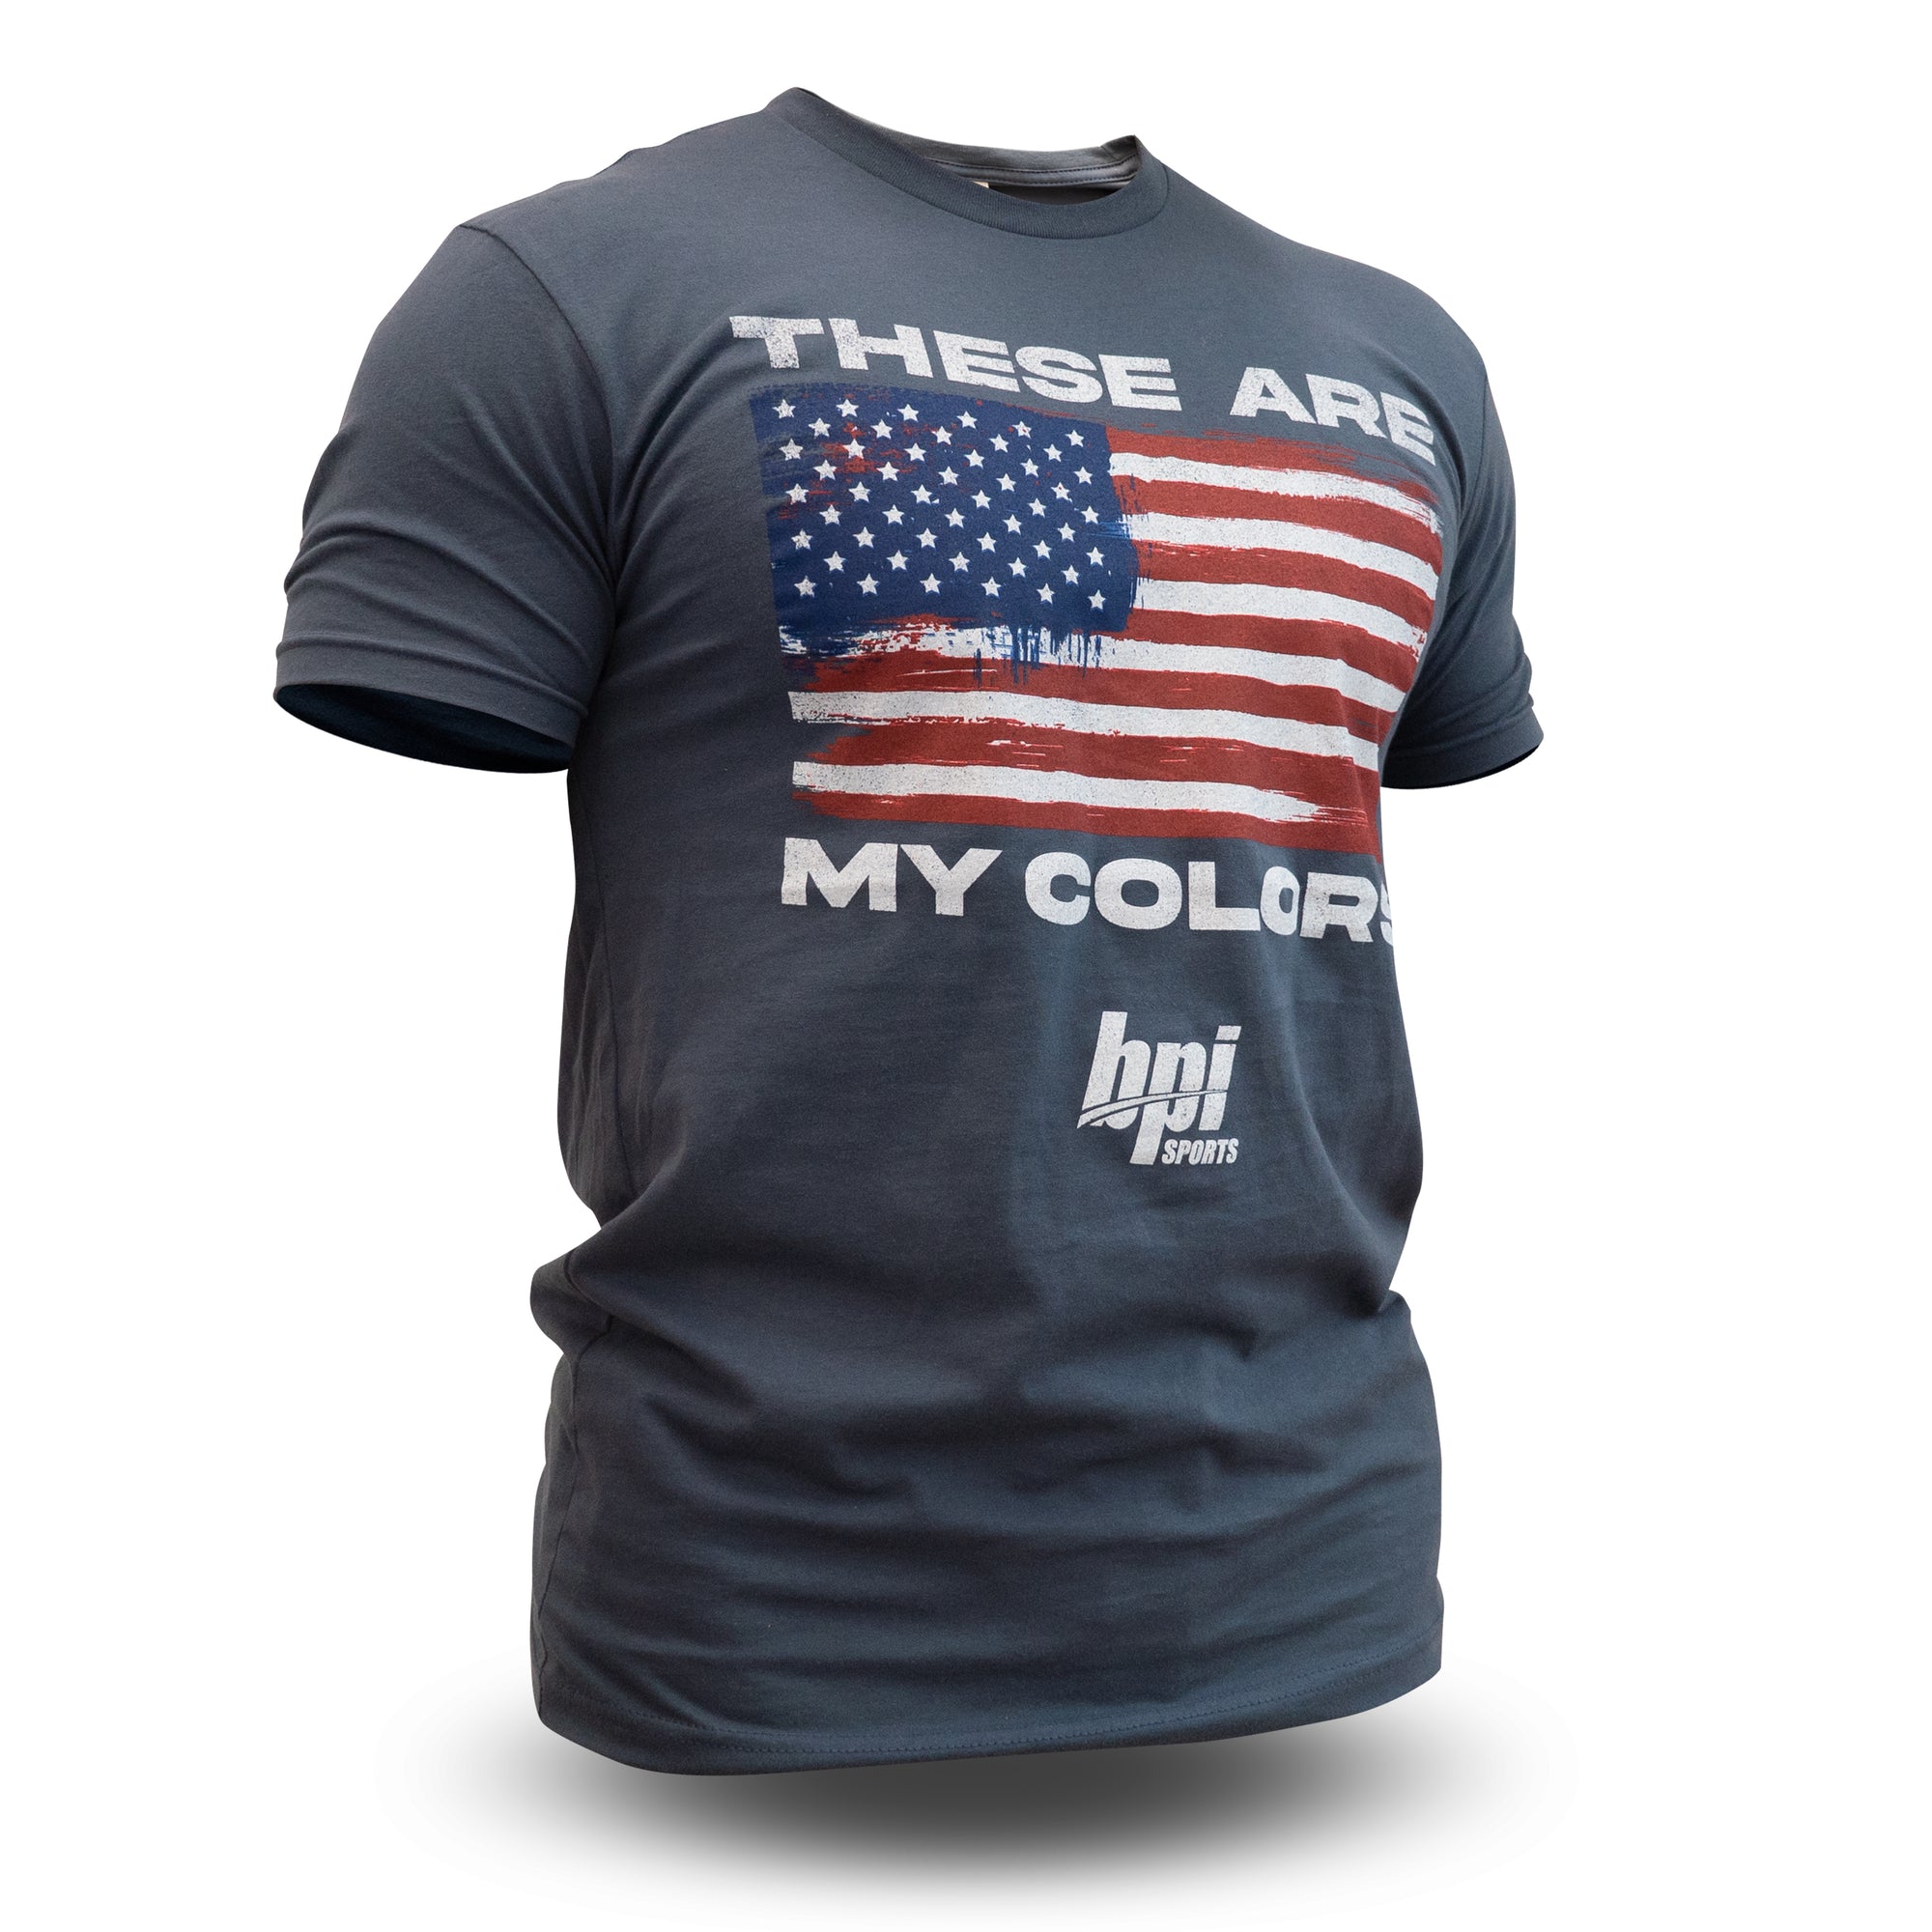 Tee shirt with logo on chest: "these are my colors" and American Flag